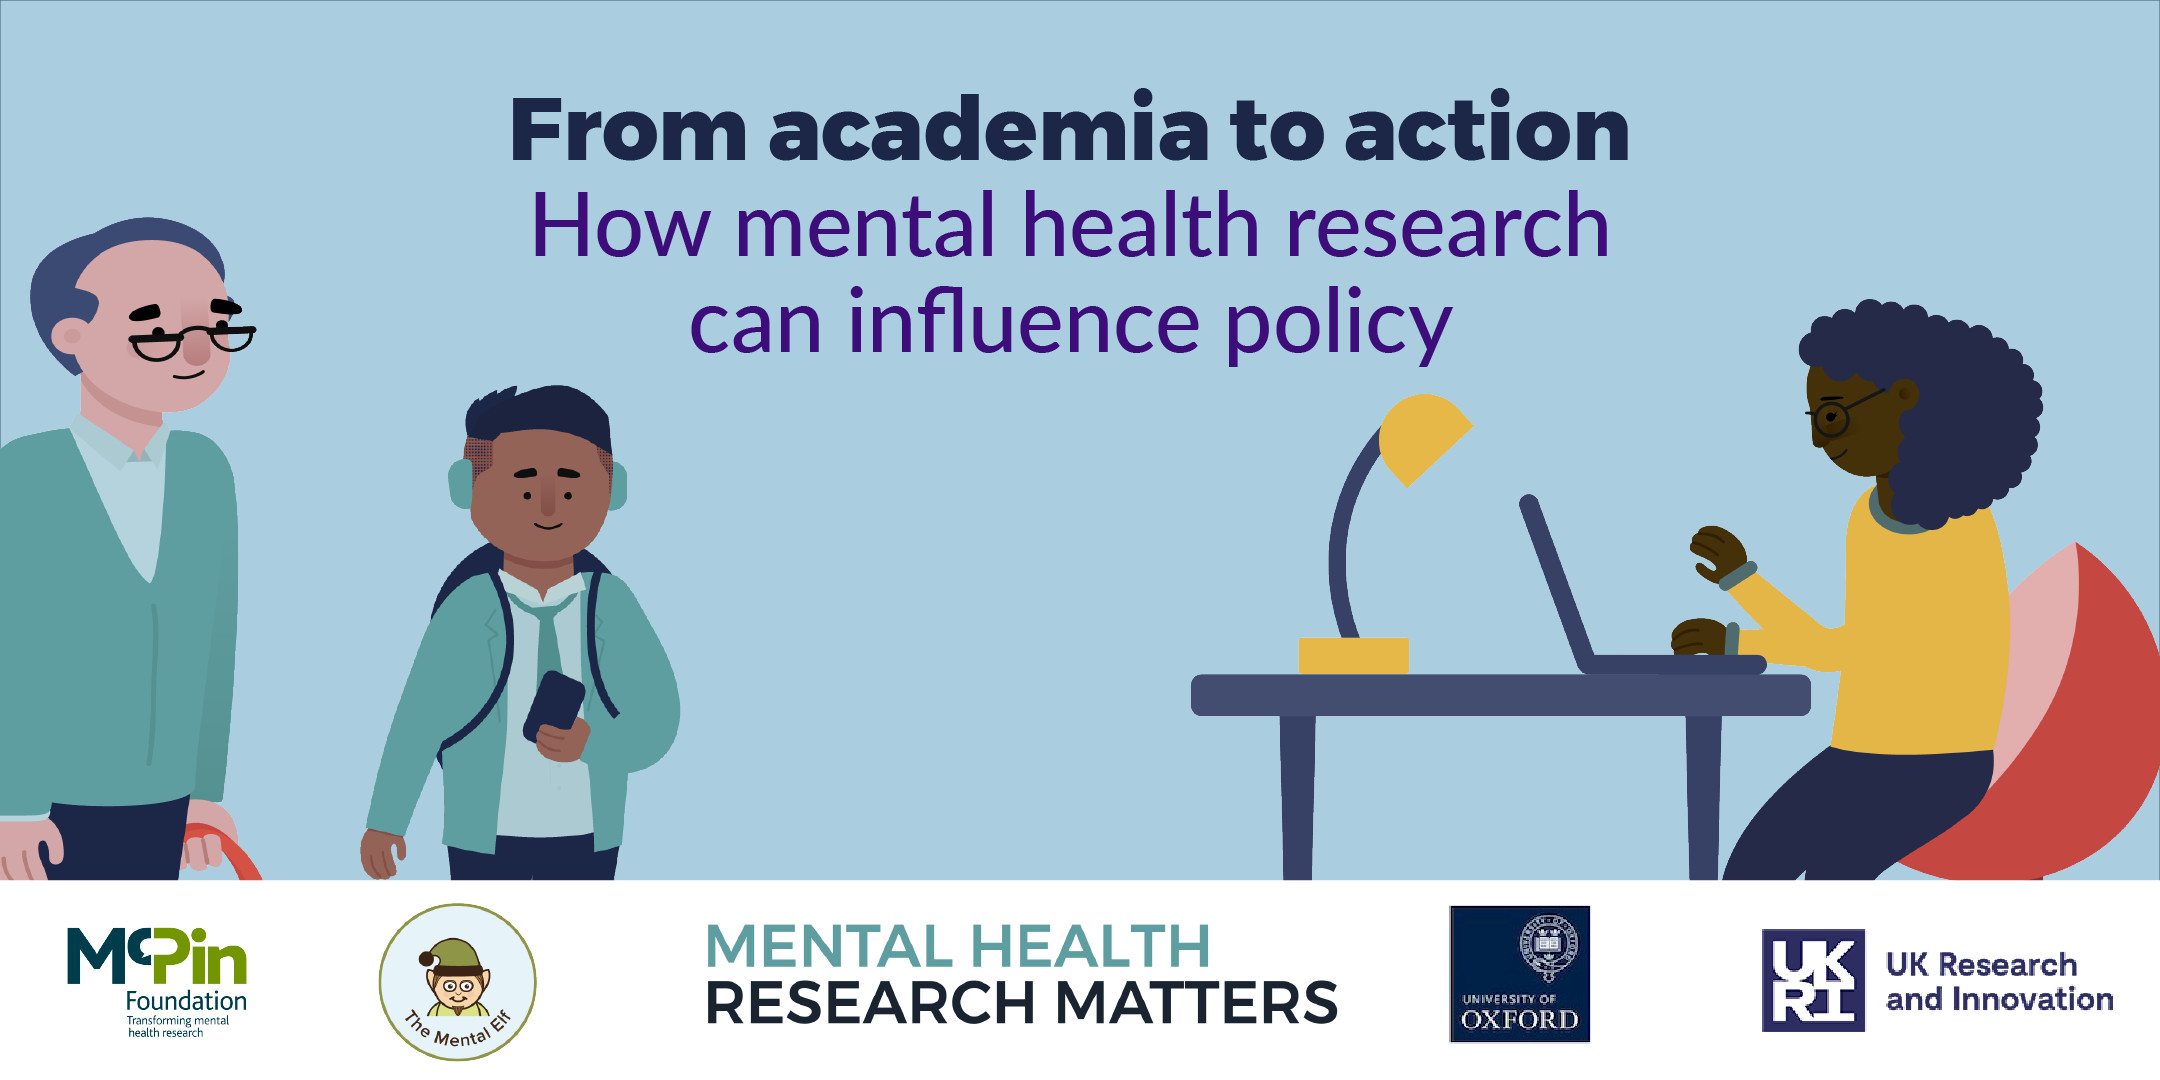 From academia to action how mental health research can influence policy